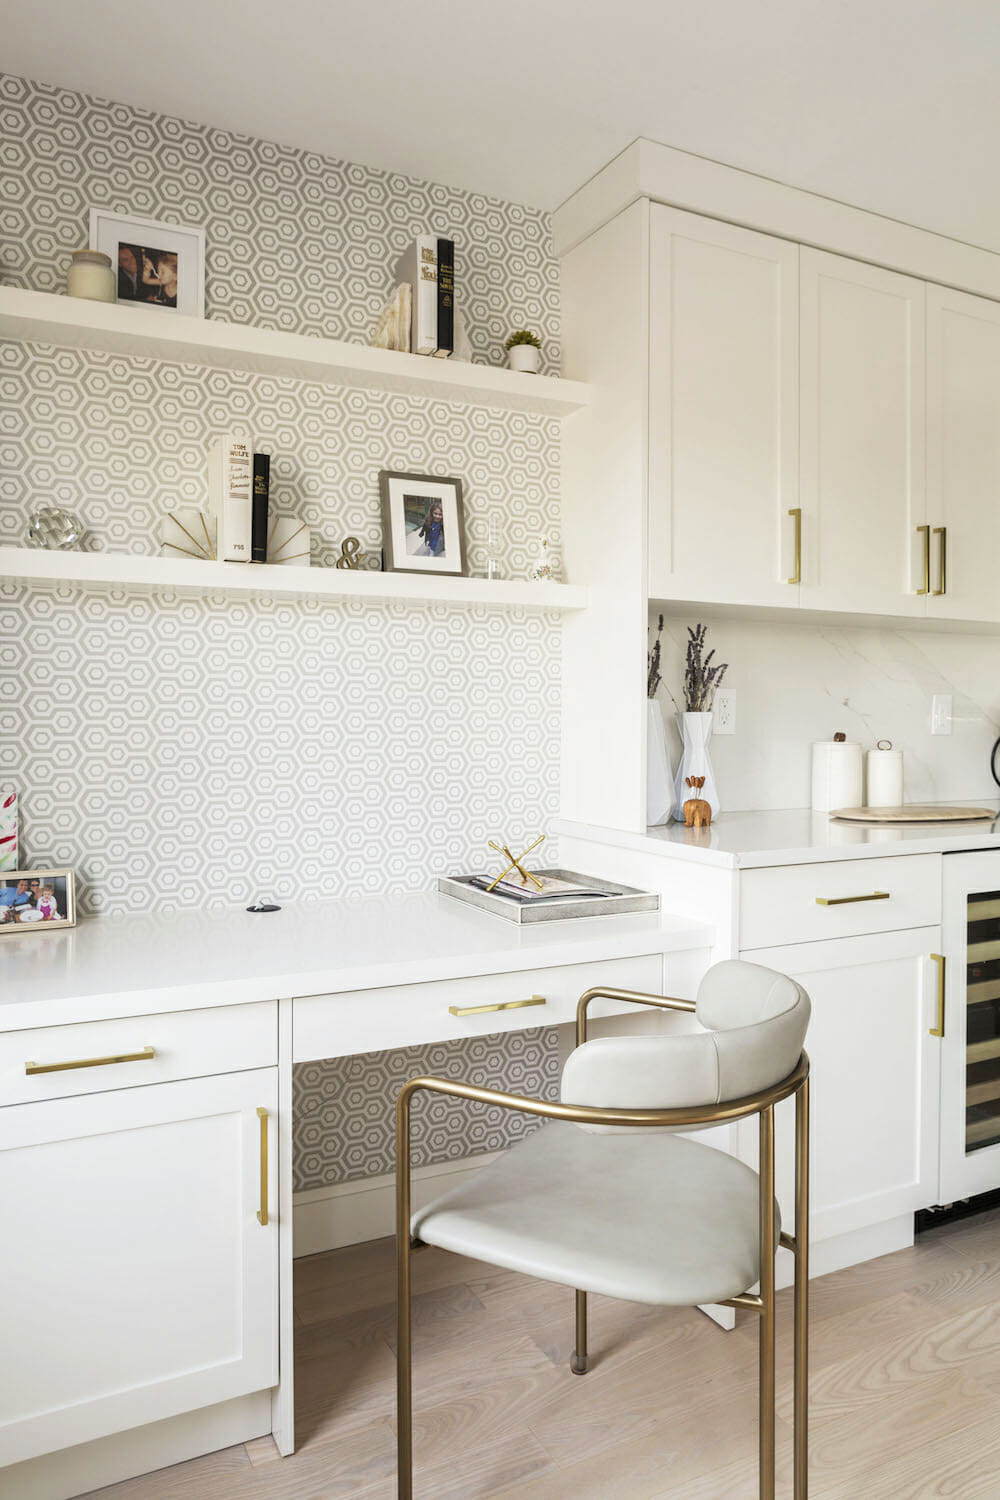 Should You Include a Desk in Your Kitchen Renovation?